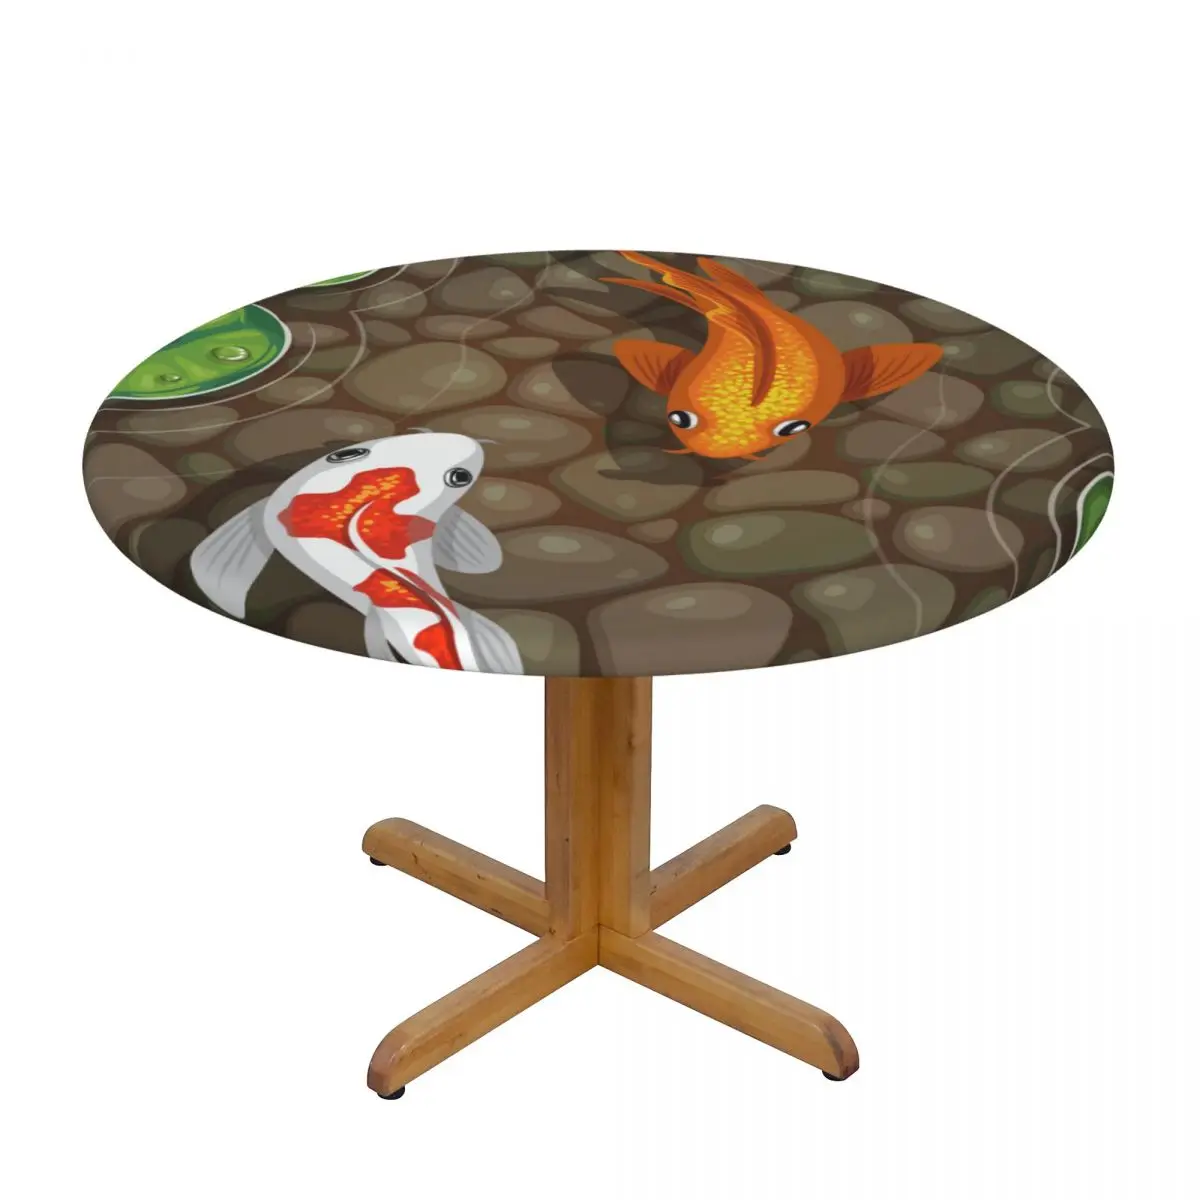 

Round Table Cover Cloth Protector Polyester Tablecloth Koi Fish In Pond Fitted Table Cover with Elastic Edged